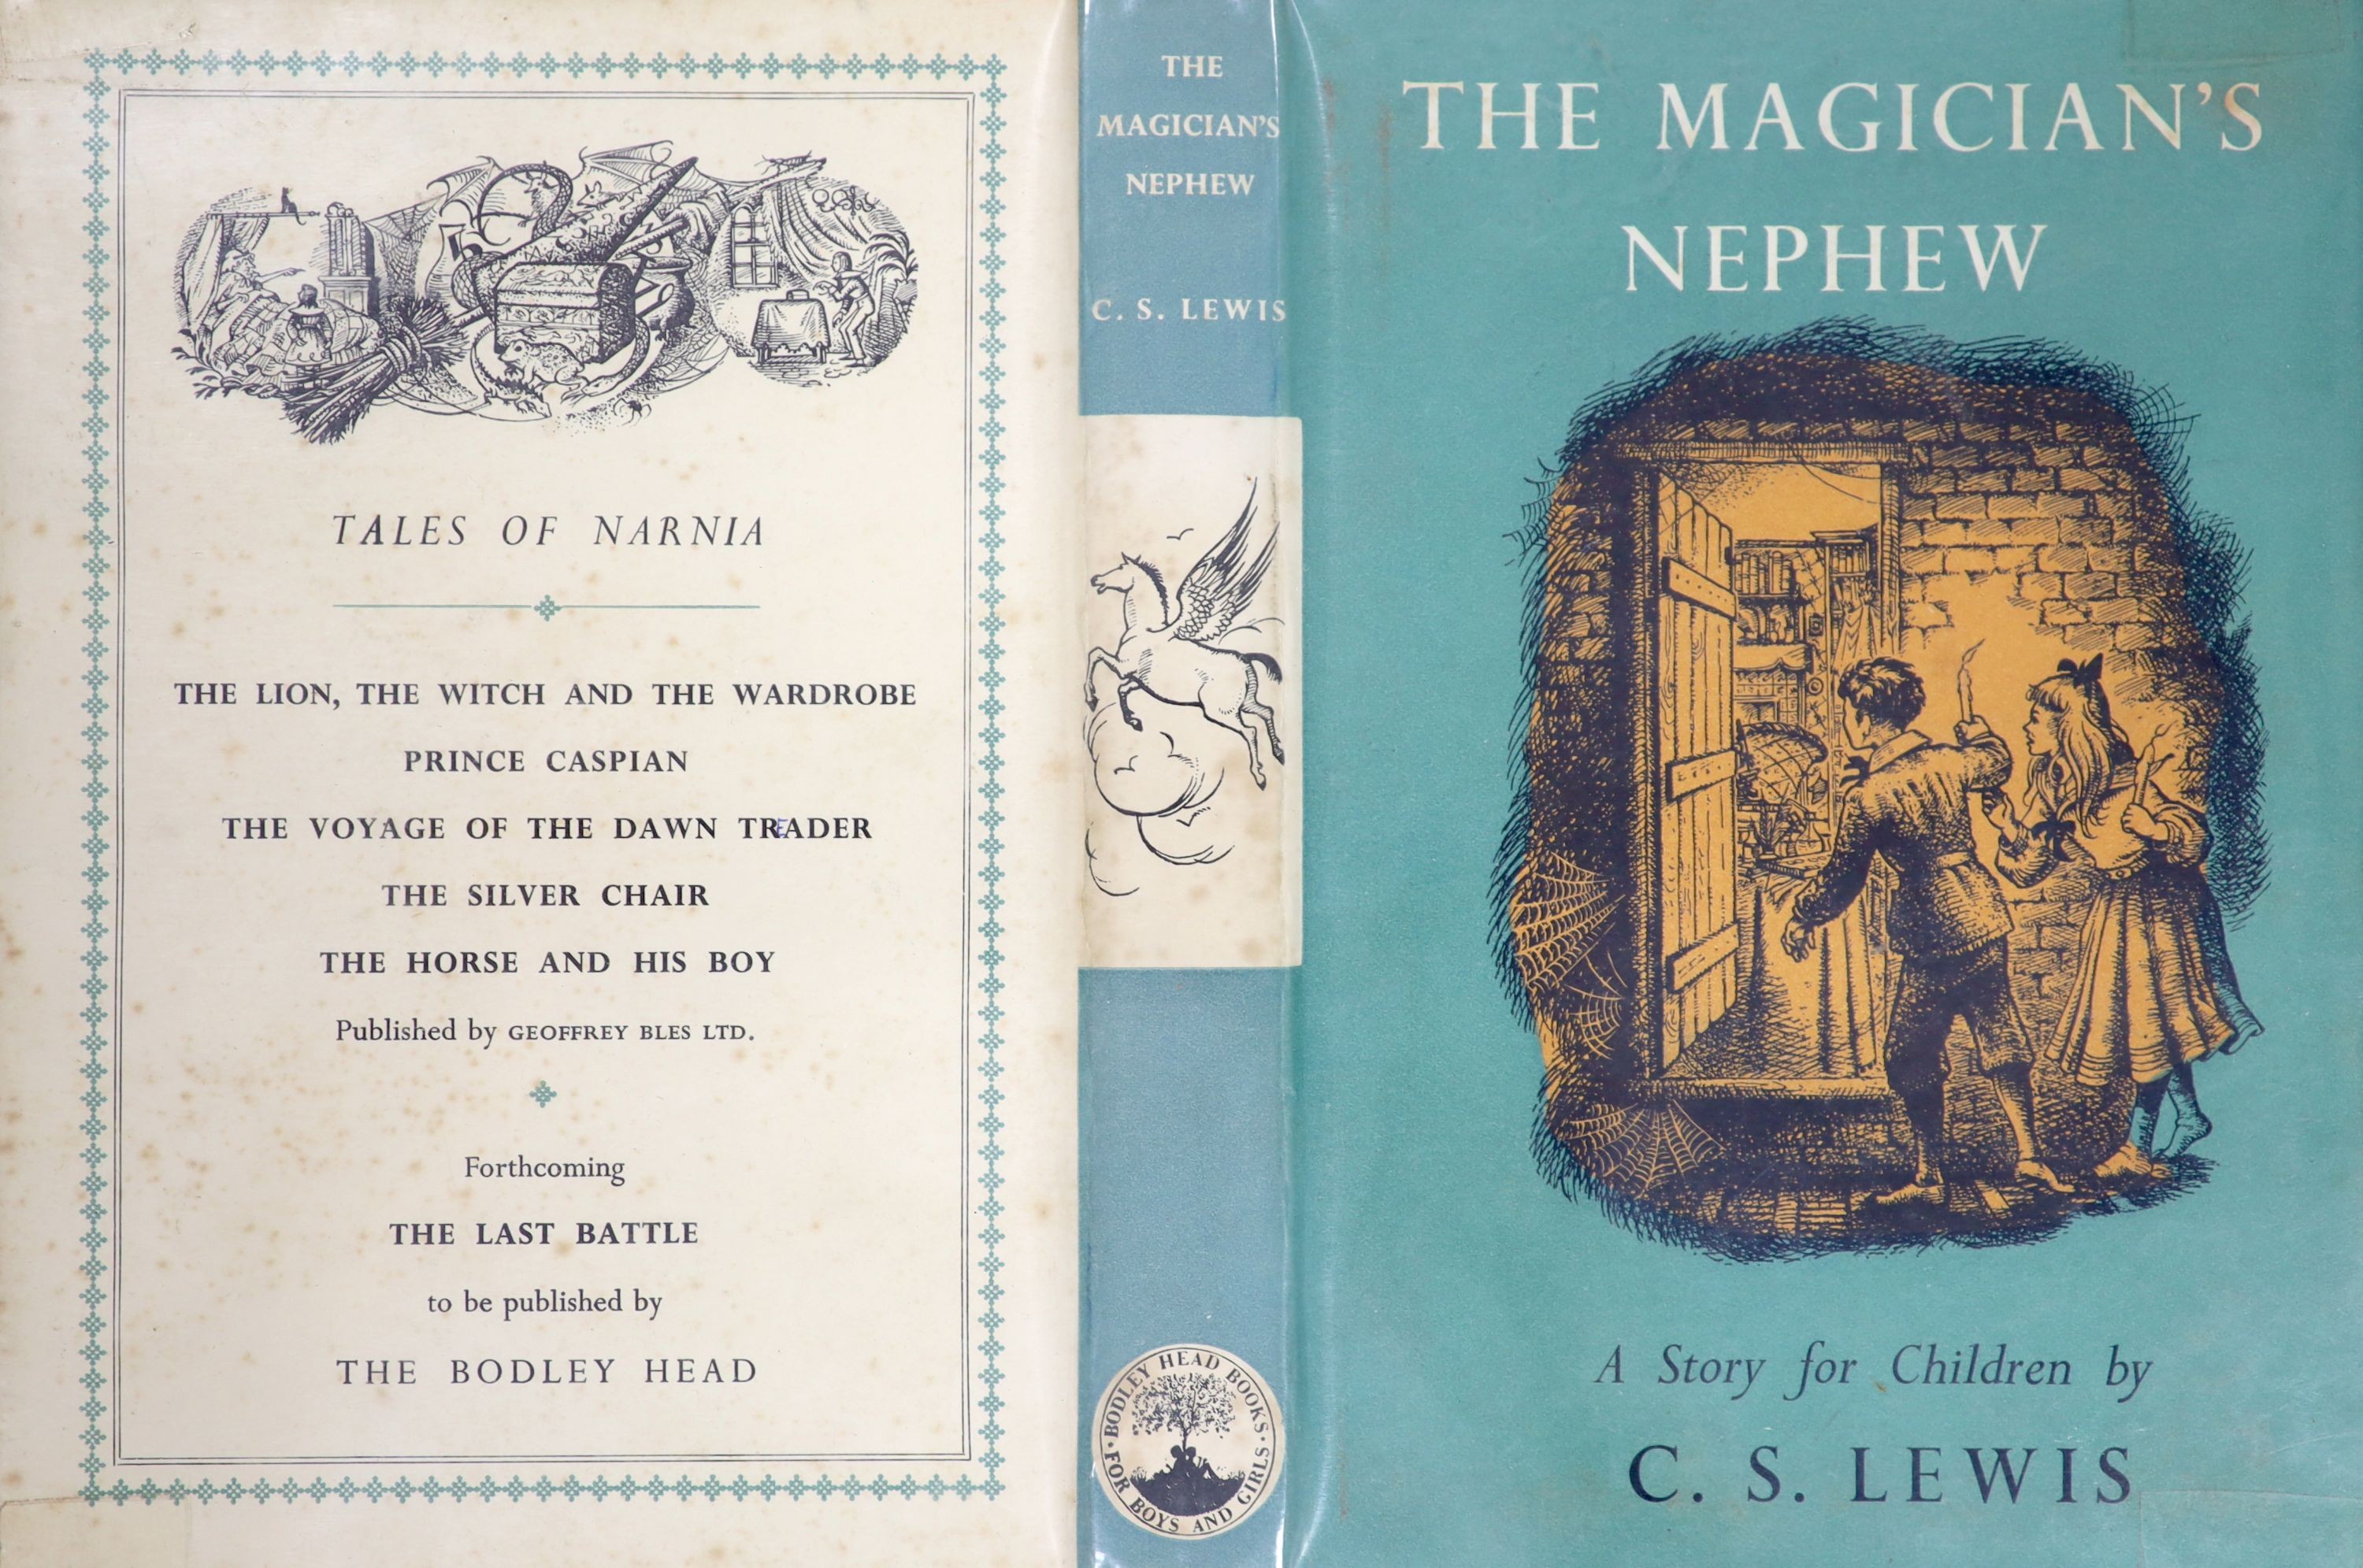 Lewis, Clive Staples - The Magician’s Nephew, 1st edition, 8vo, illustrated by Pauline Baynes, original cloth, in unclipped d/j, The Bodley Head, London, 1955